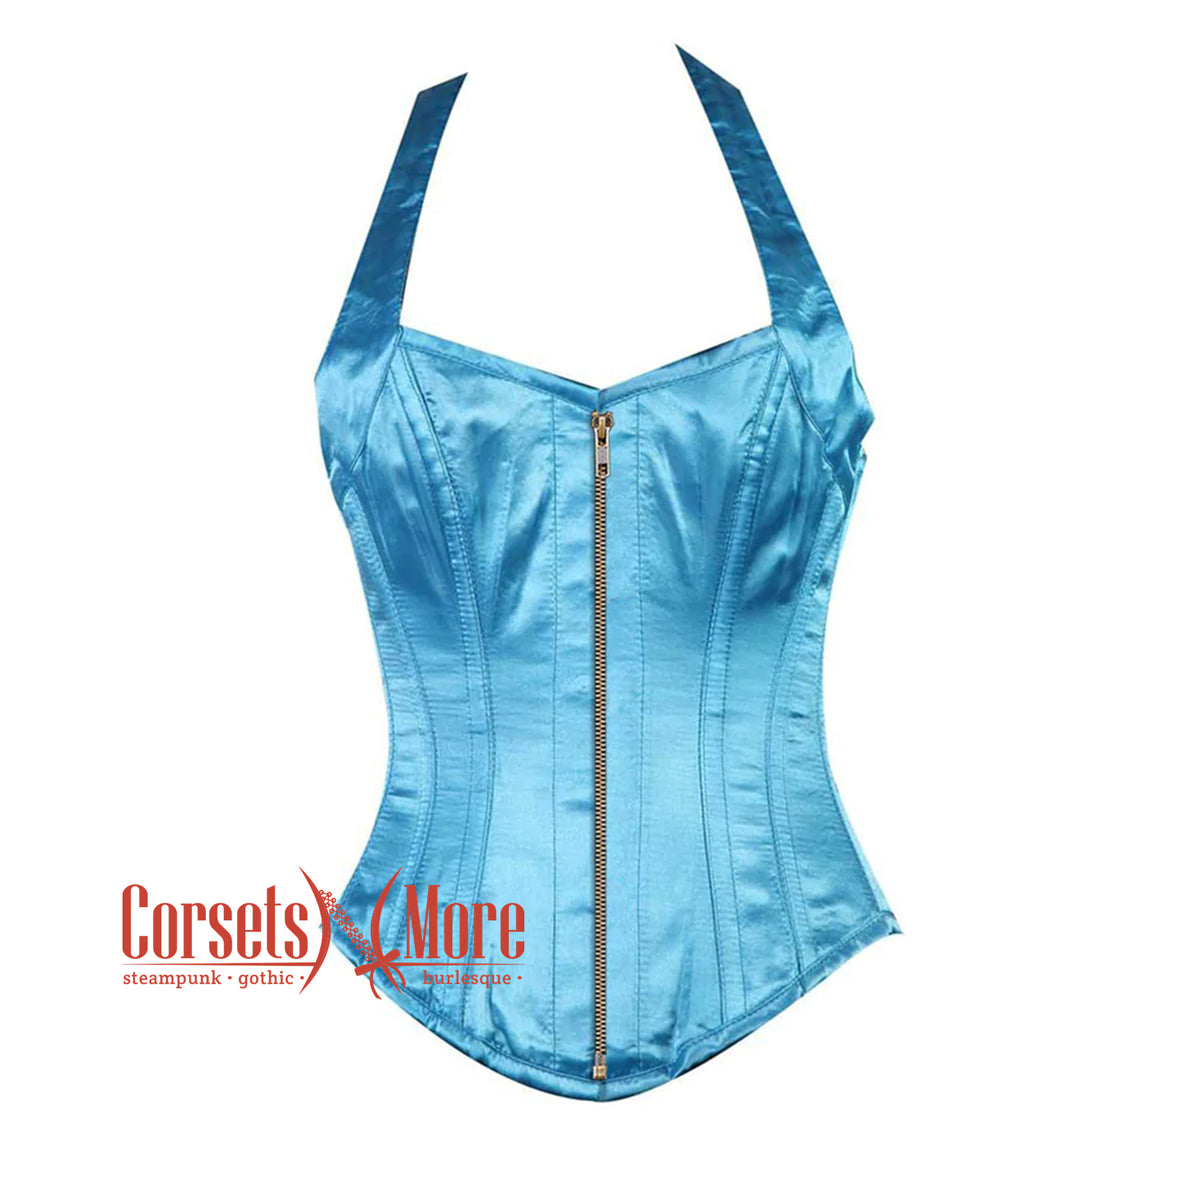  Baby Blue Satin Corset Gothic Burlesque Bustier Waist Training  Underbust Costume : Clothing, Shoes & Jewelry